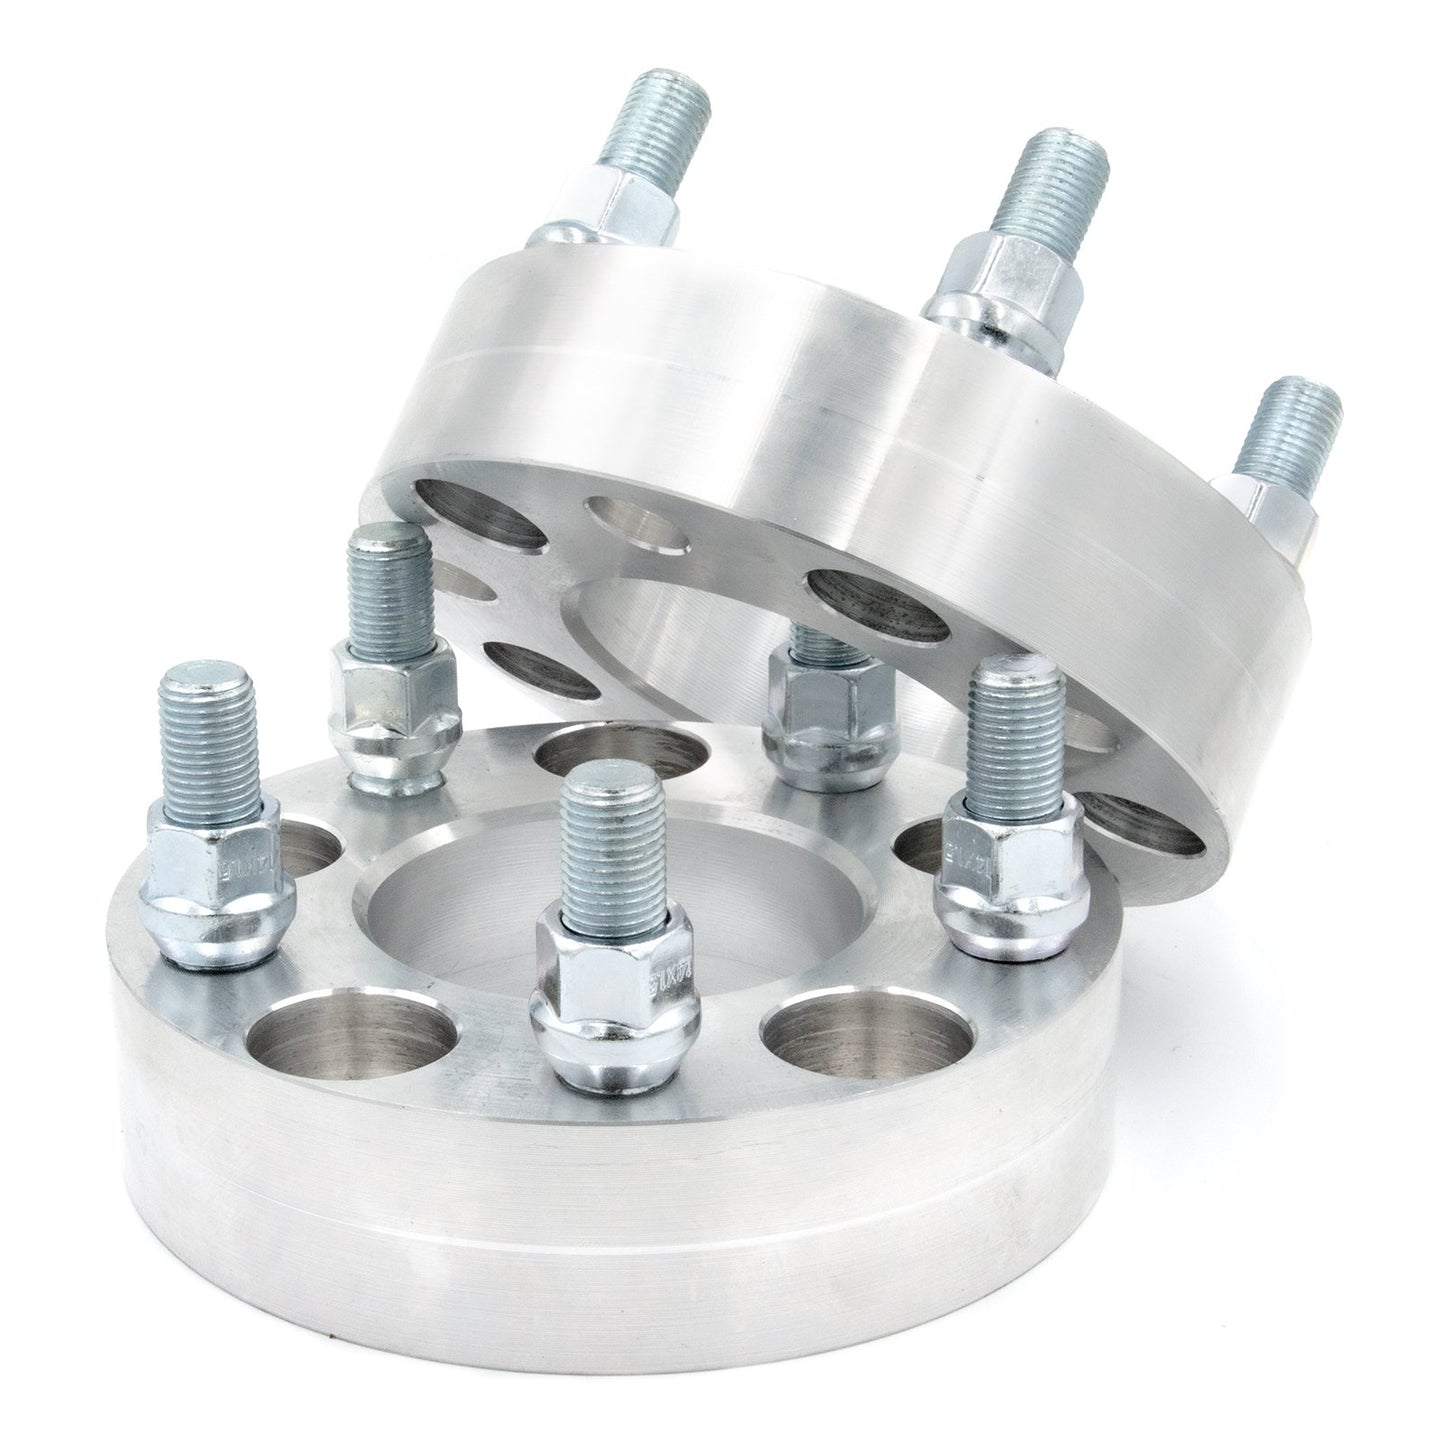 5x150 to 5x135 Wheel Spacer/Adapter - Thickness: 3/4"- 4"